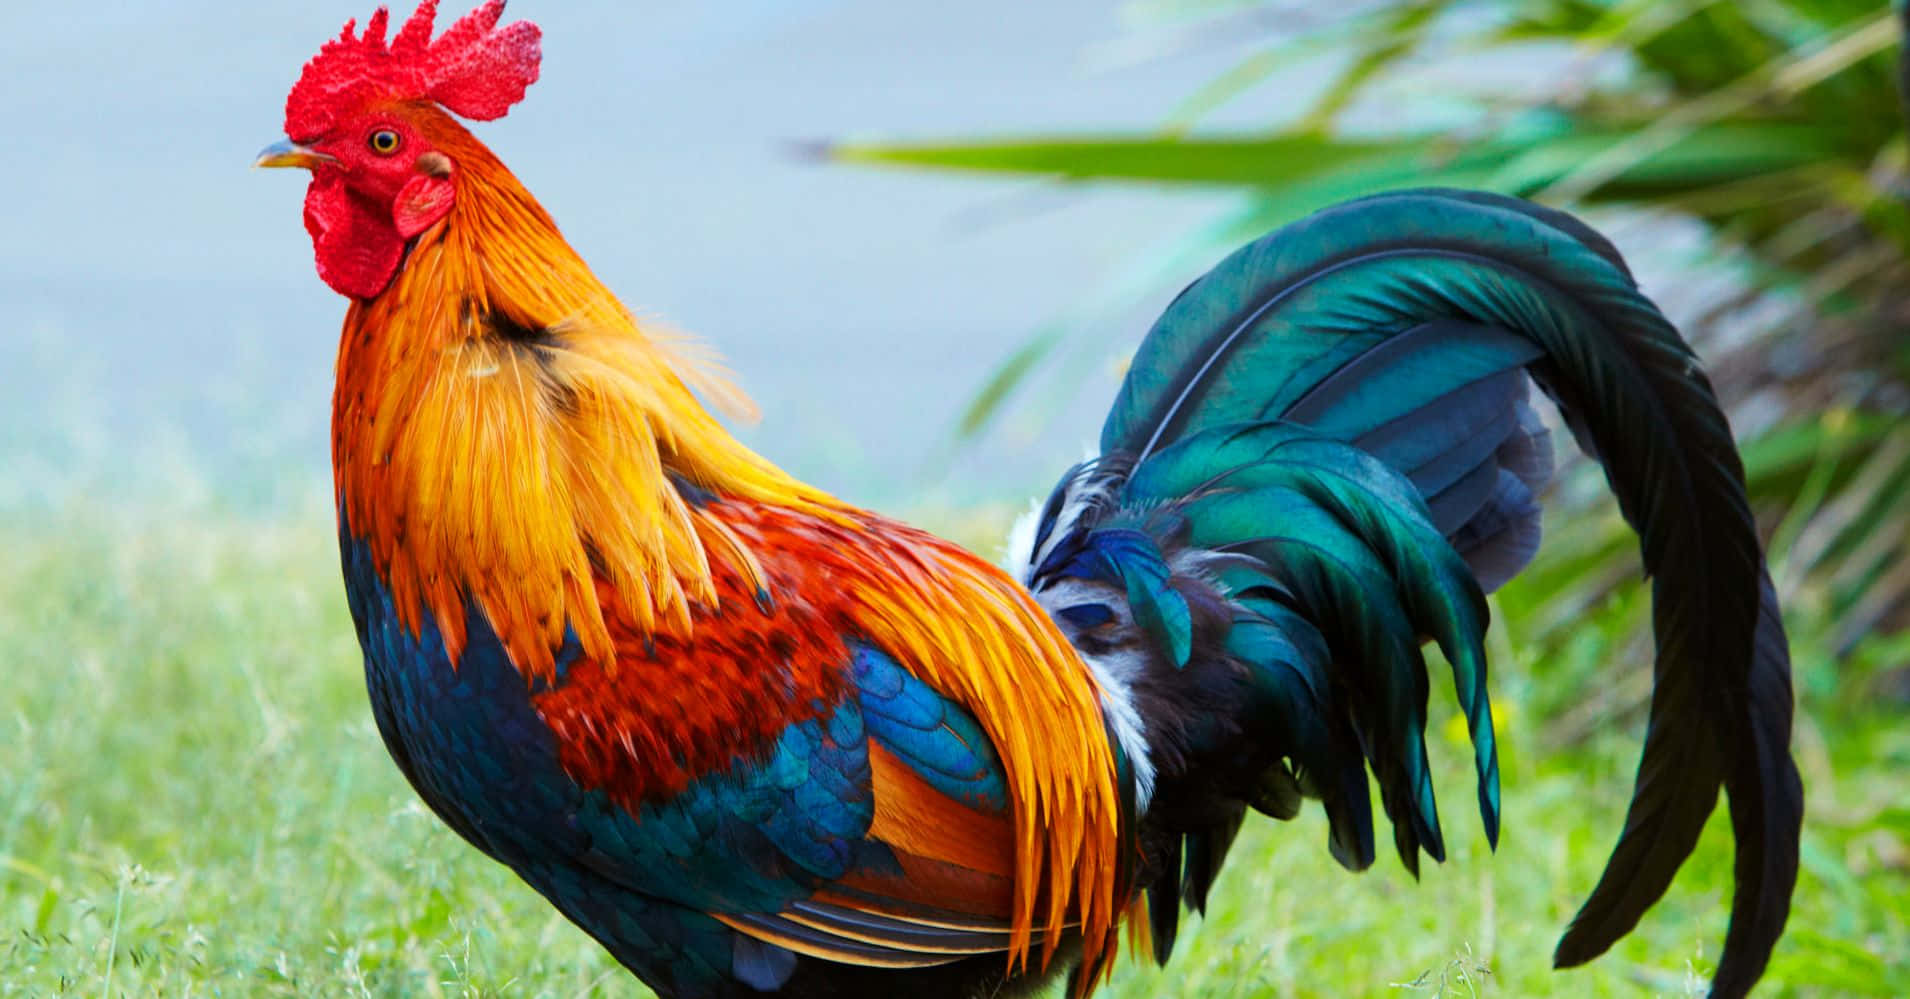 A Colorful Rooster Is Standing In The Grass